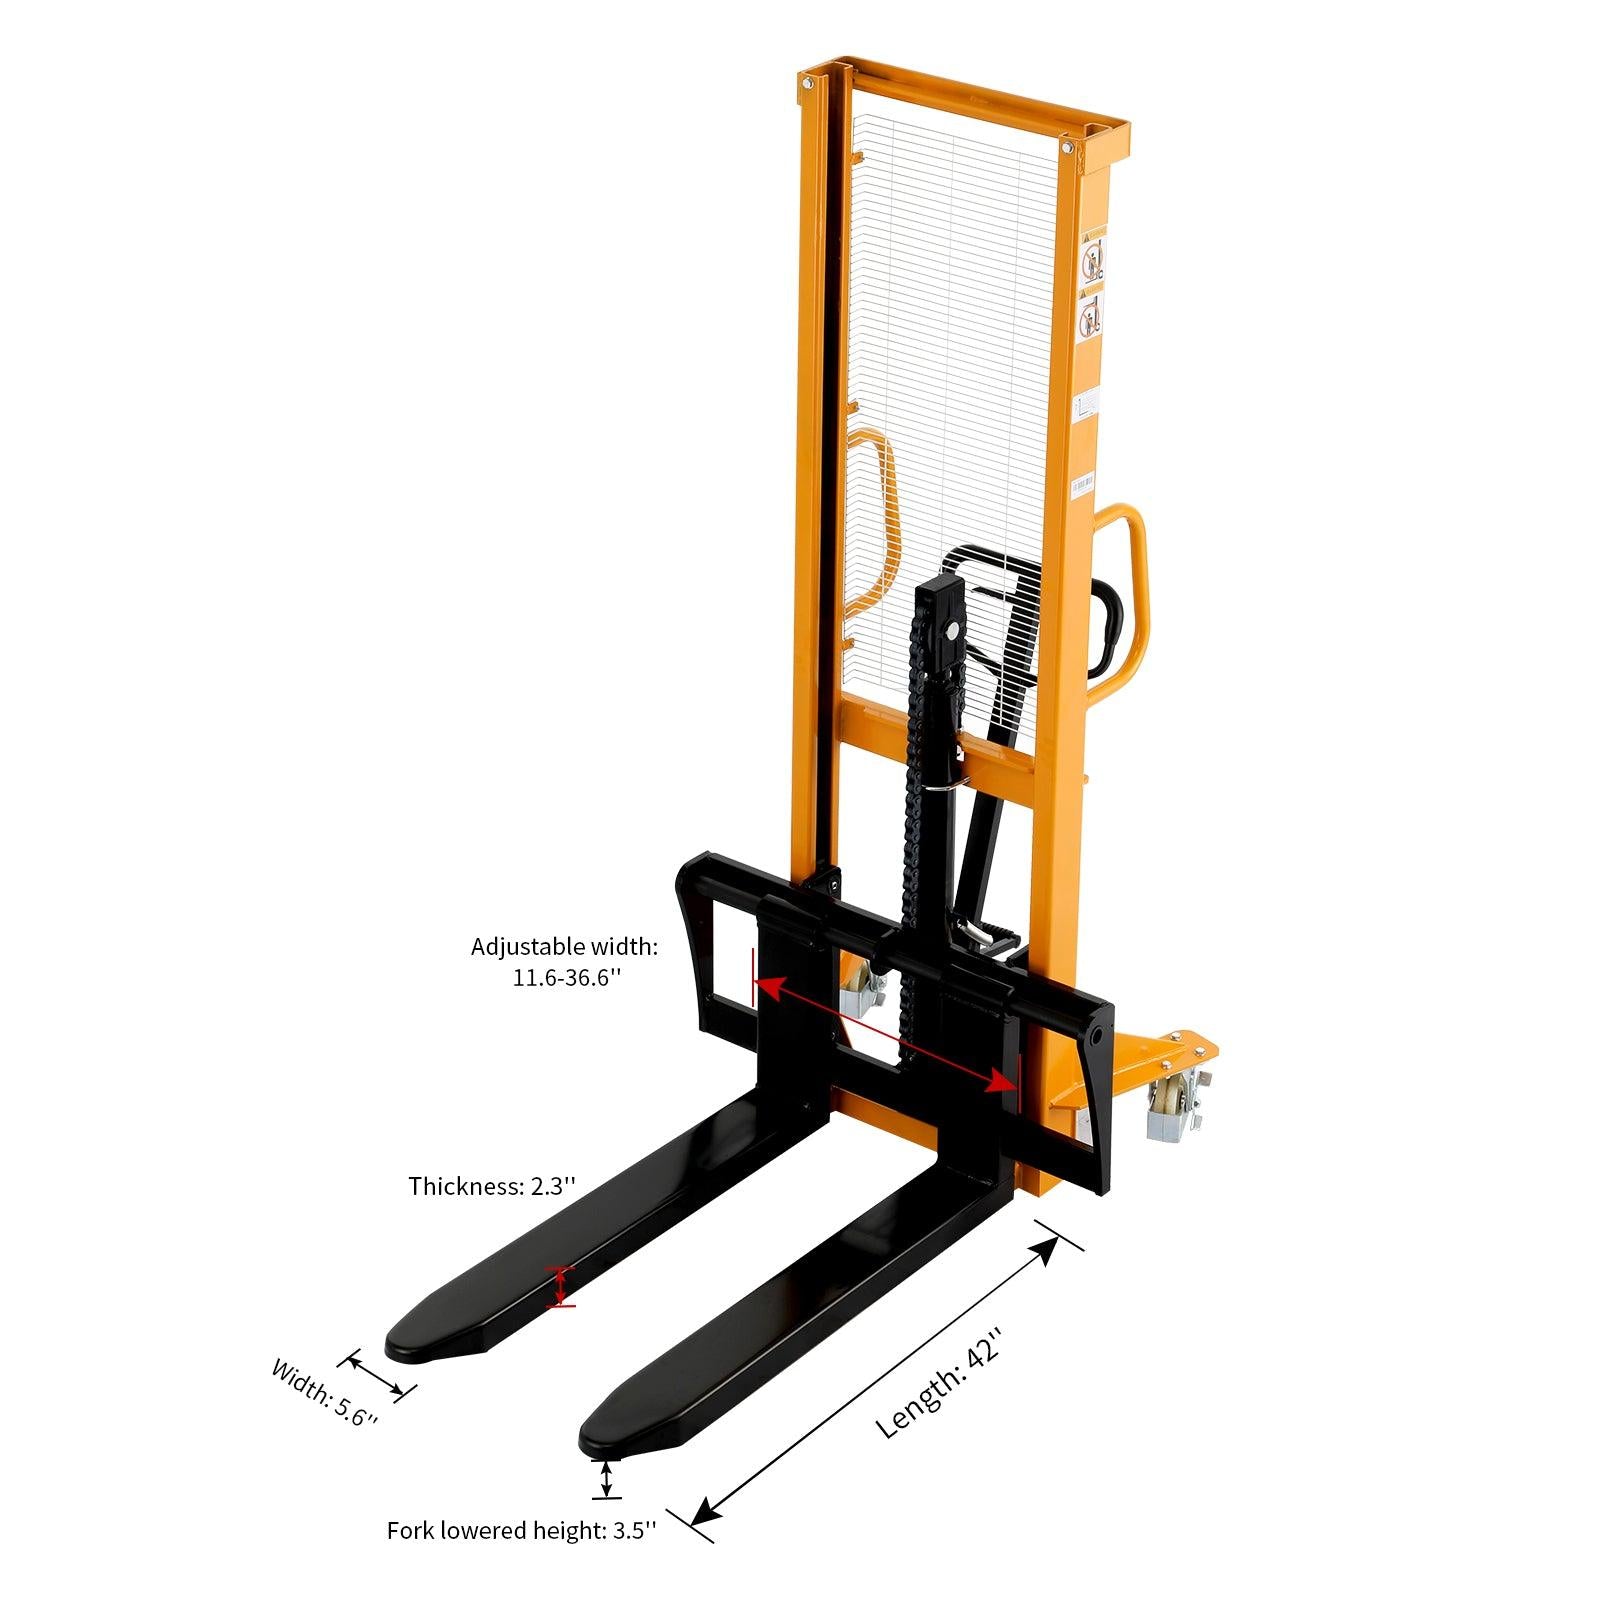 ApolloLift | Manual Hydraulic Stacker Pallet Stacker Adjustable Forks 2200lbs Cap. 63" Lift Height A-3003